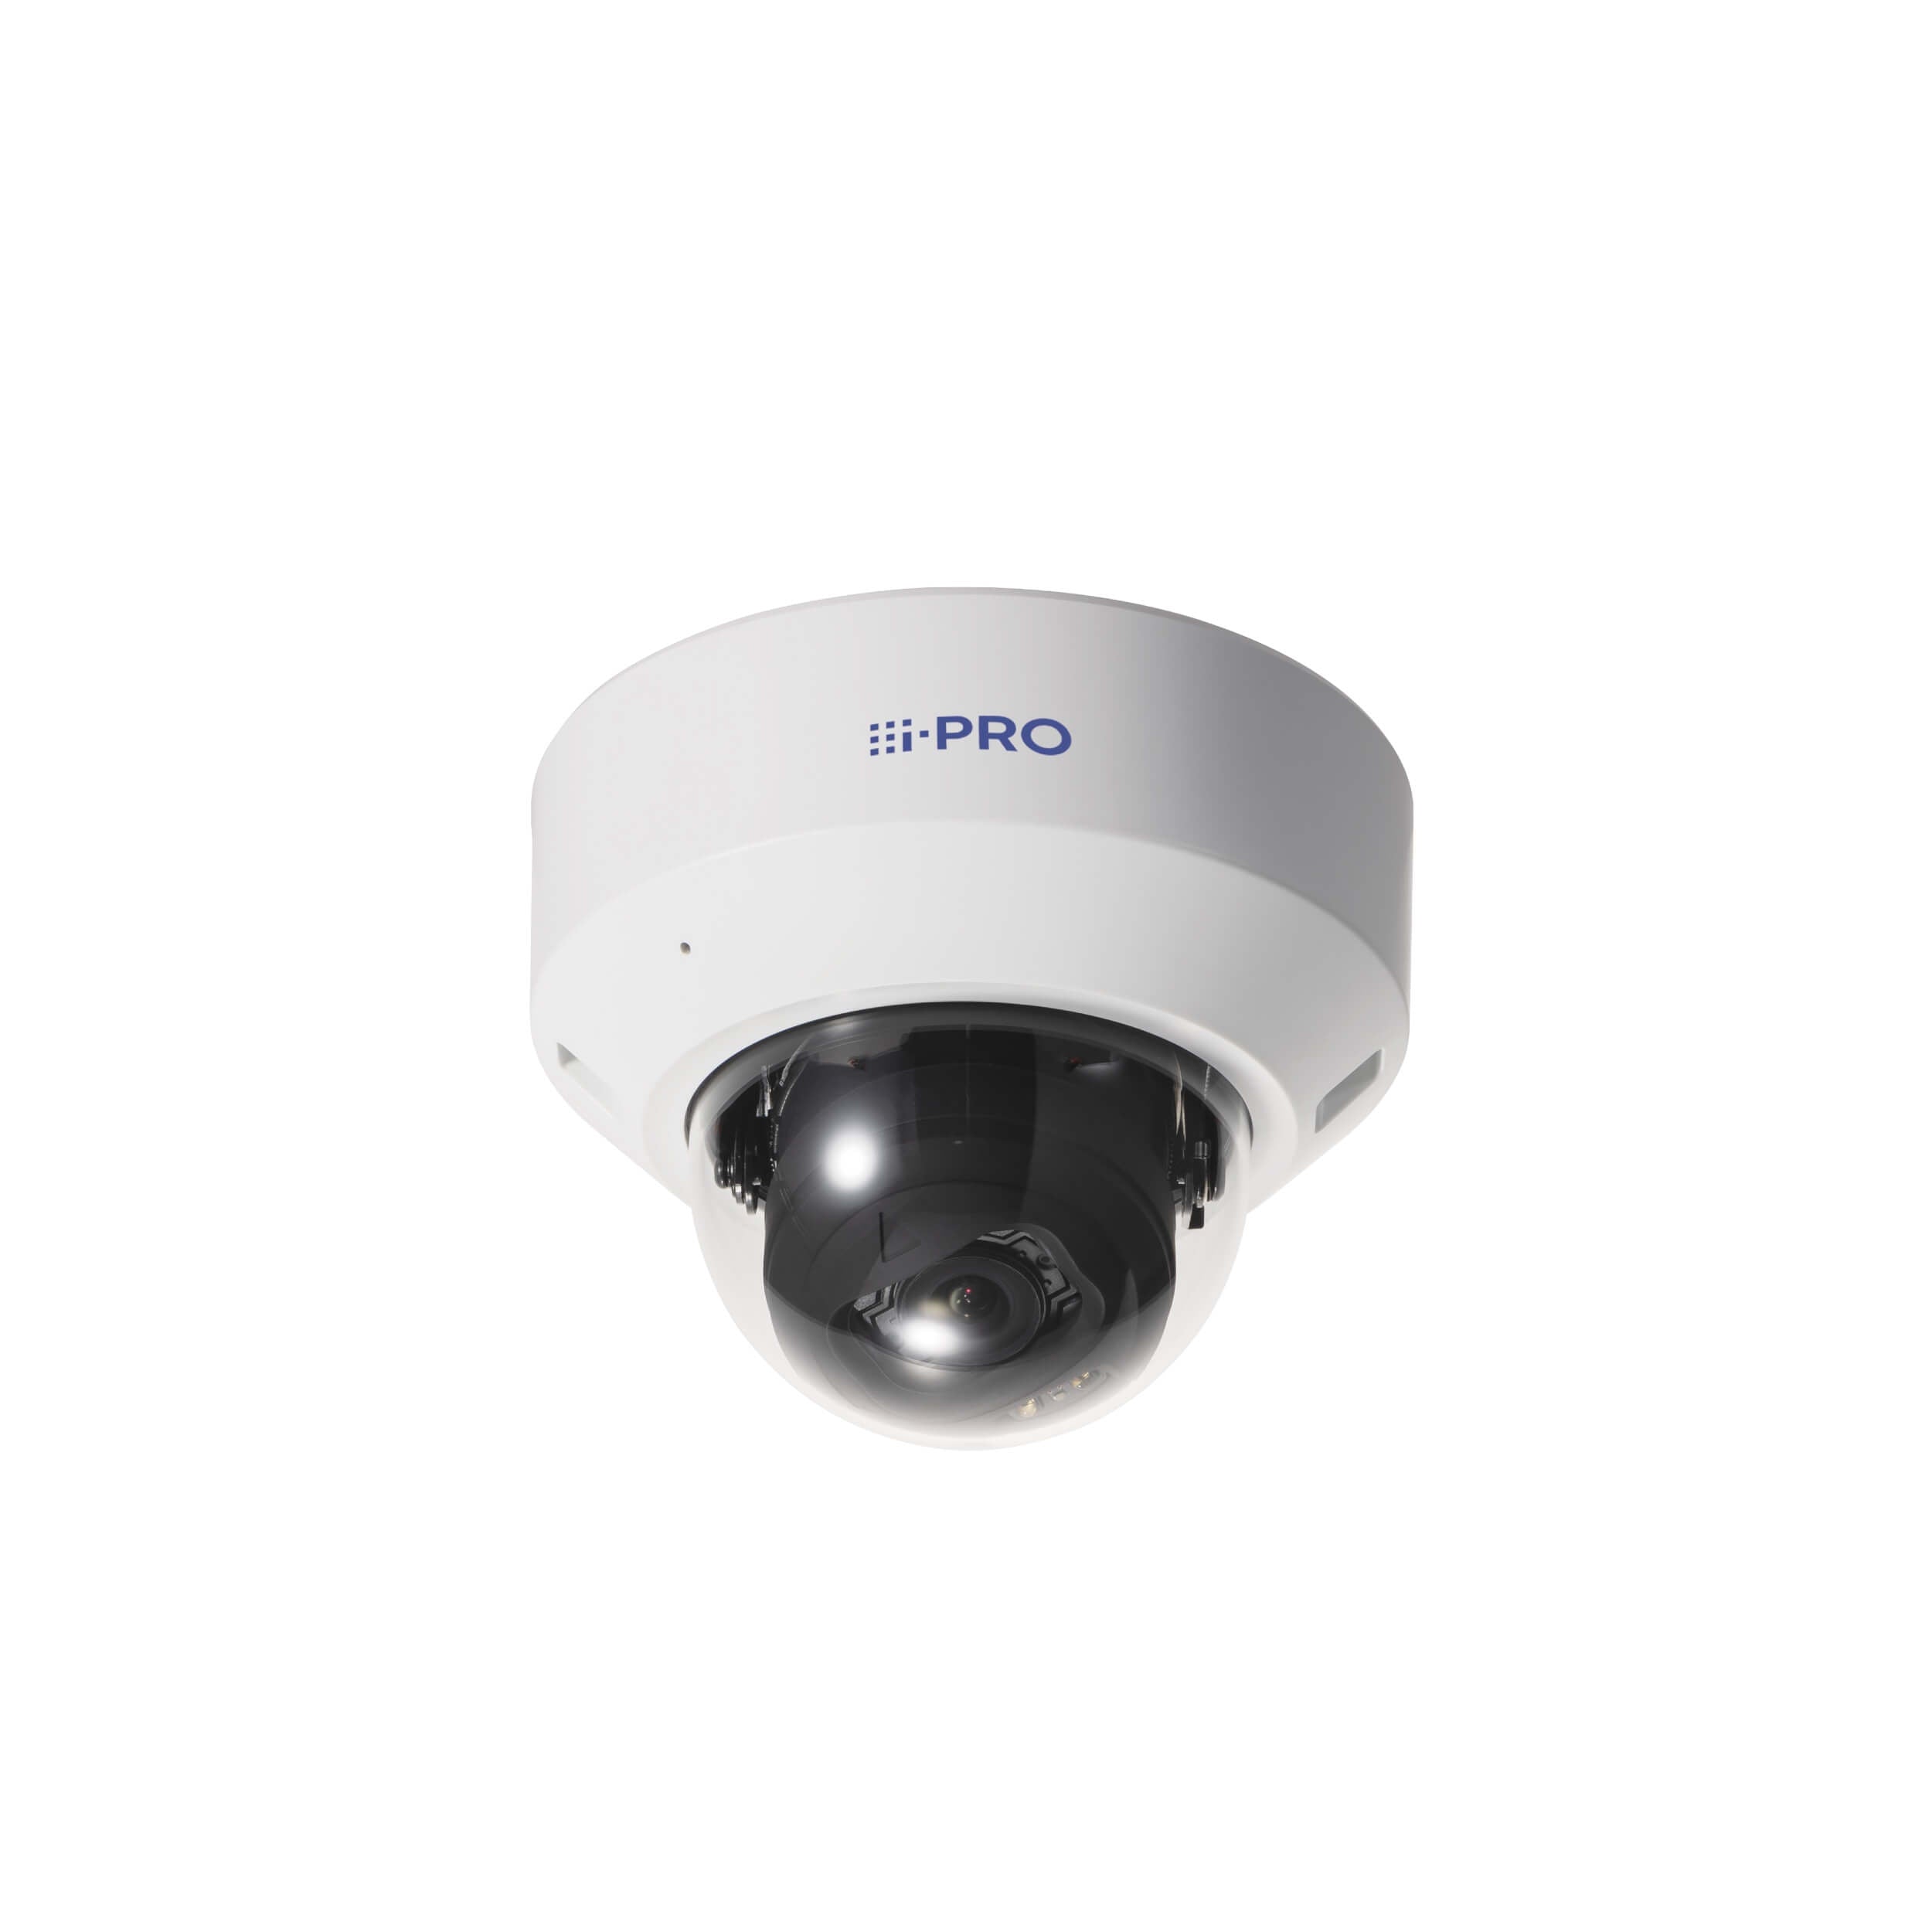 Panasonic WV-S22500-V3LG 5MP Vandal Resistant Indoor Dome Network Camera, Smoke Dome with AI Engine with 2.9-9mm Lens